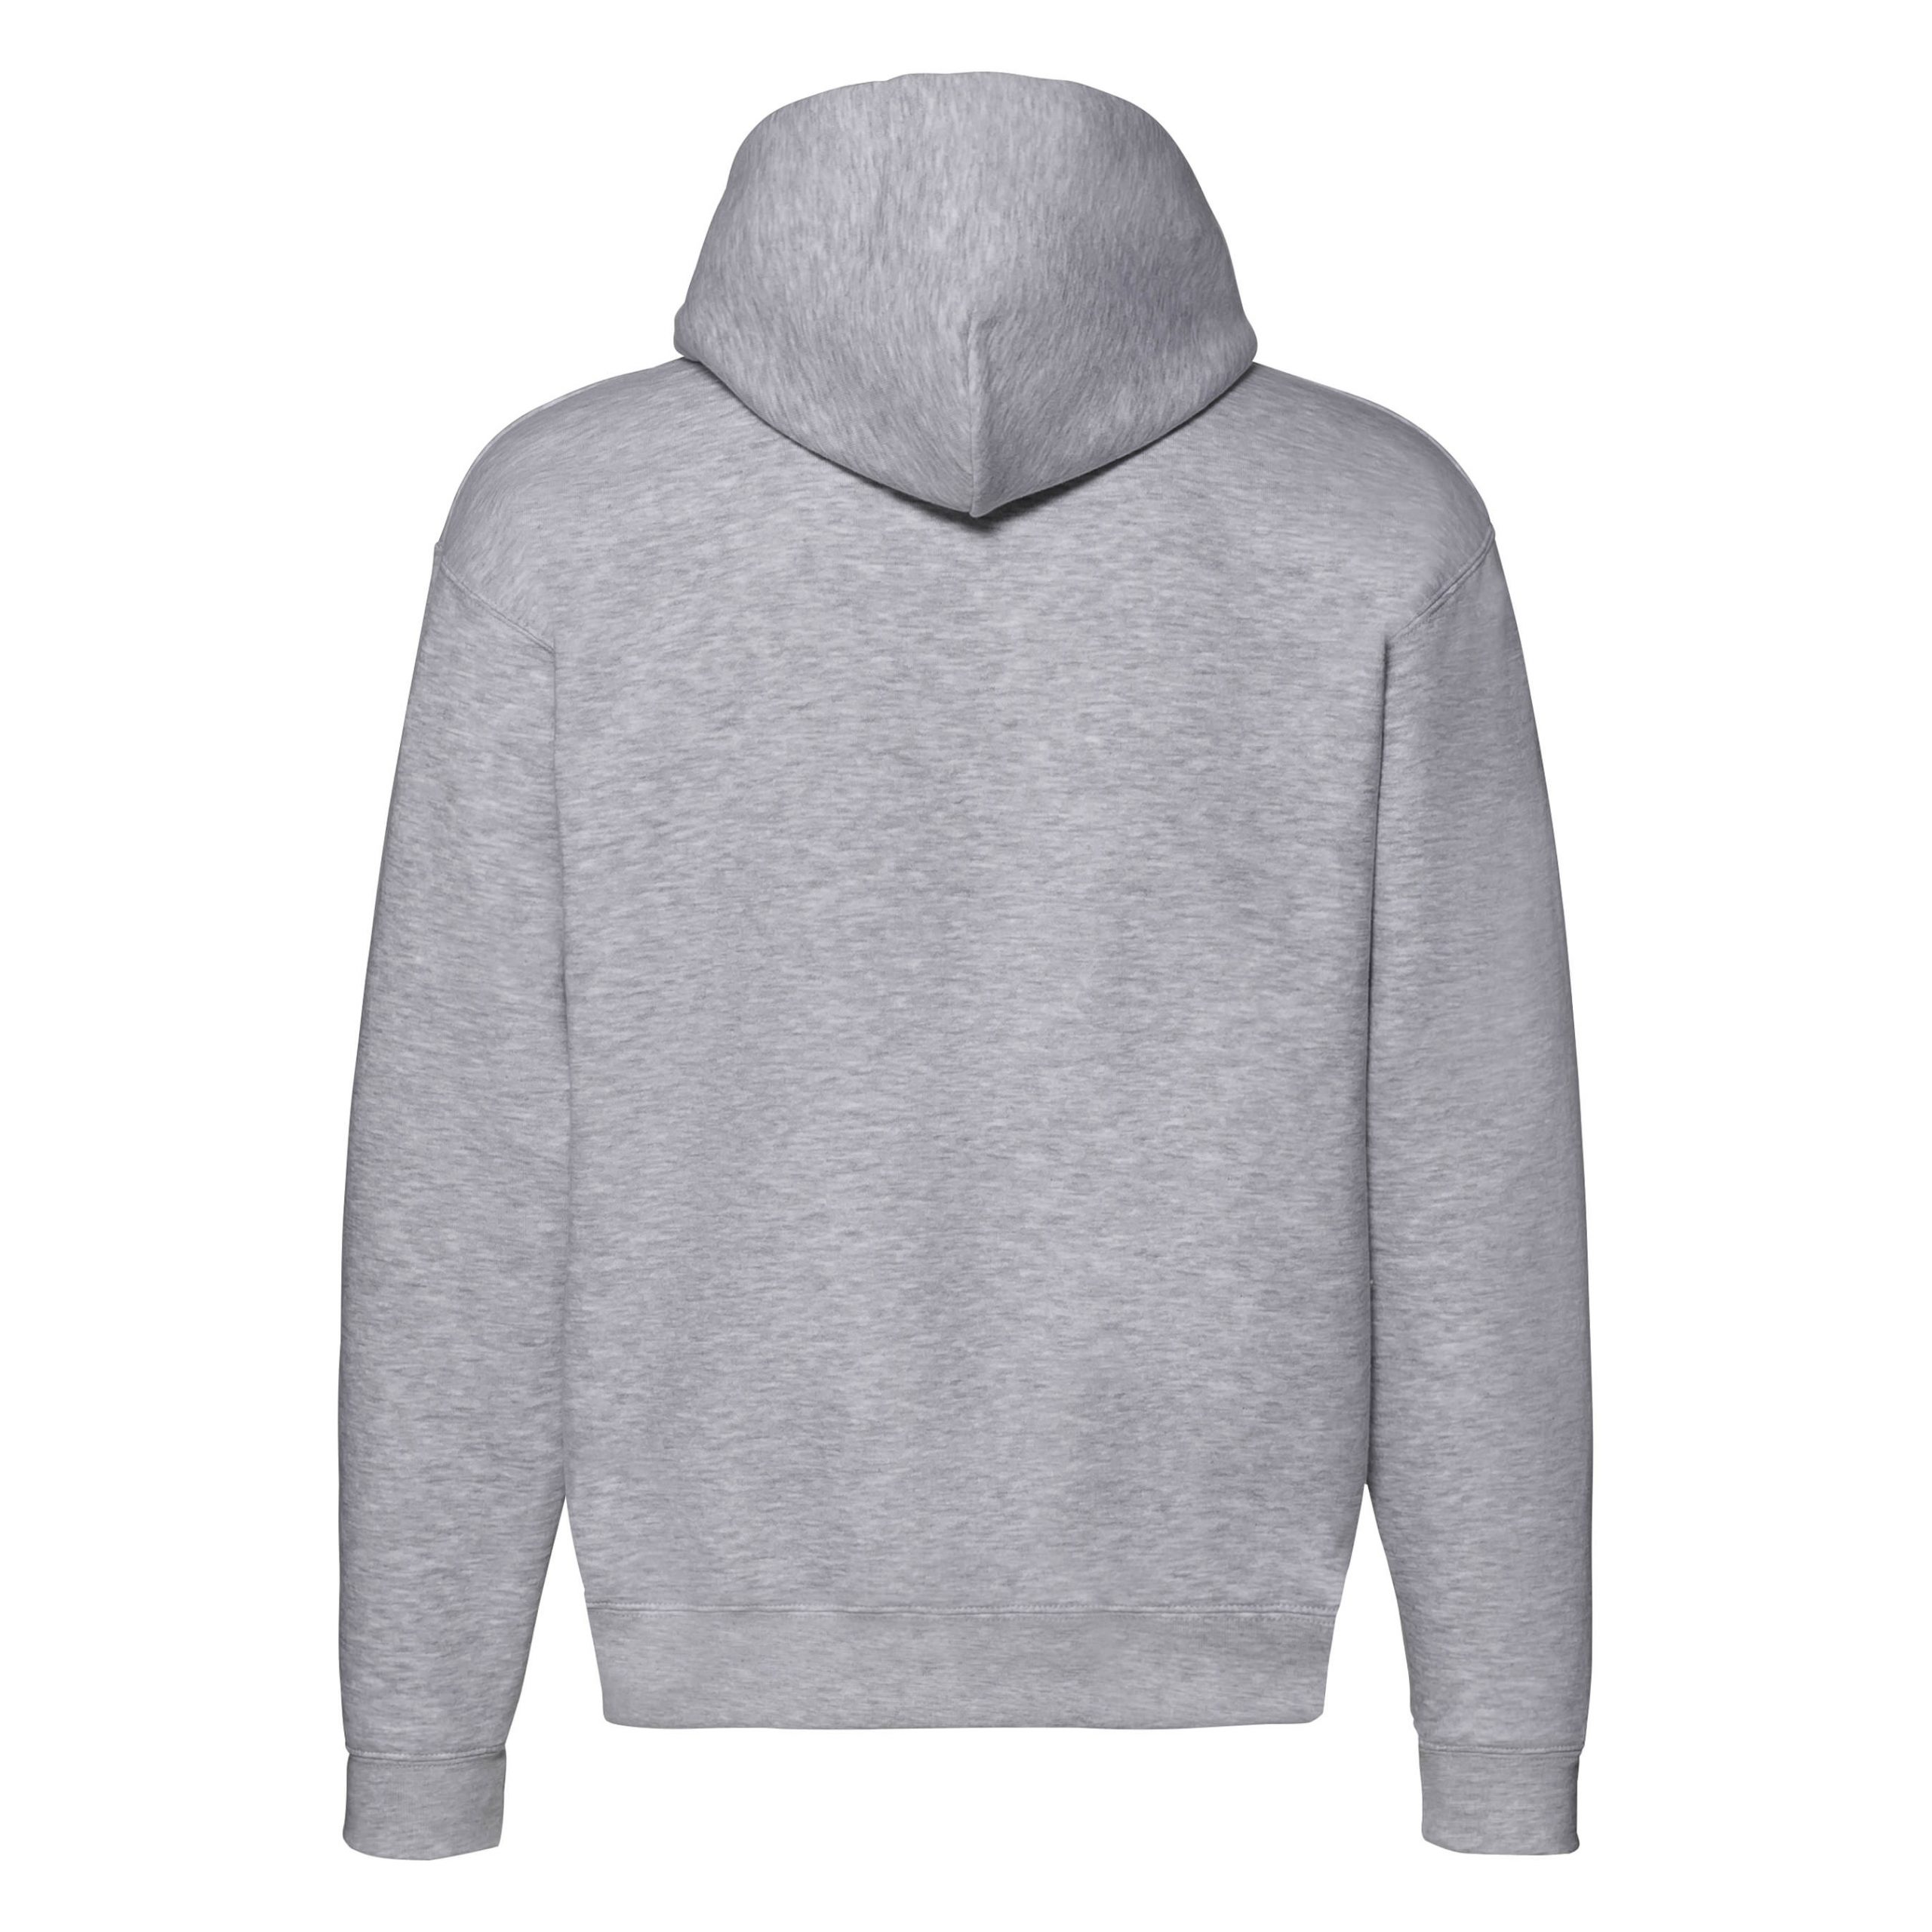 Embroidered Hoodie - AMD Promotions Shropshire